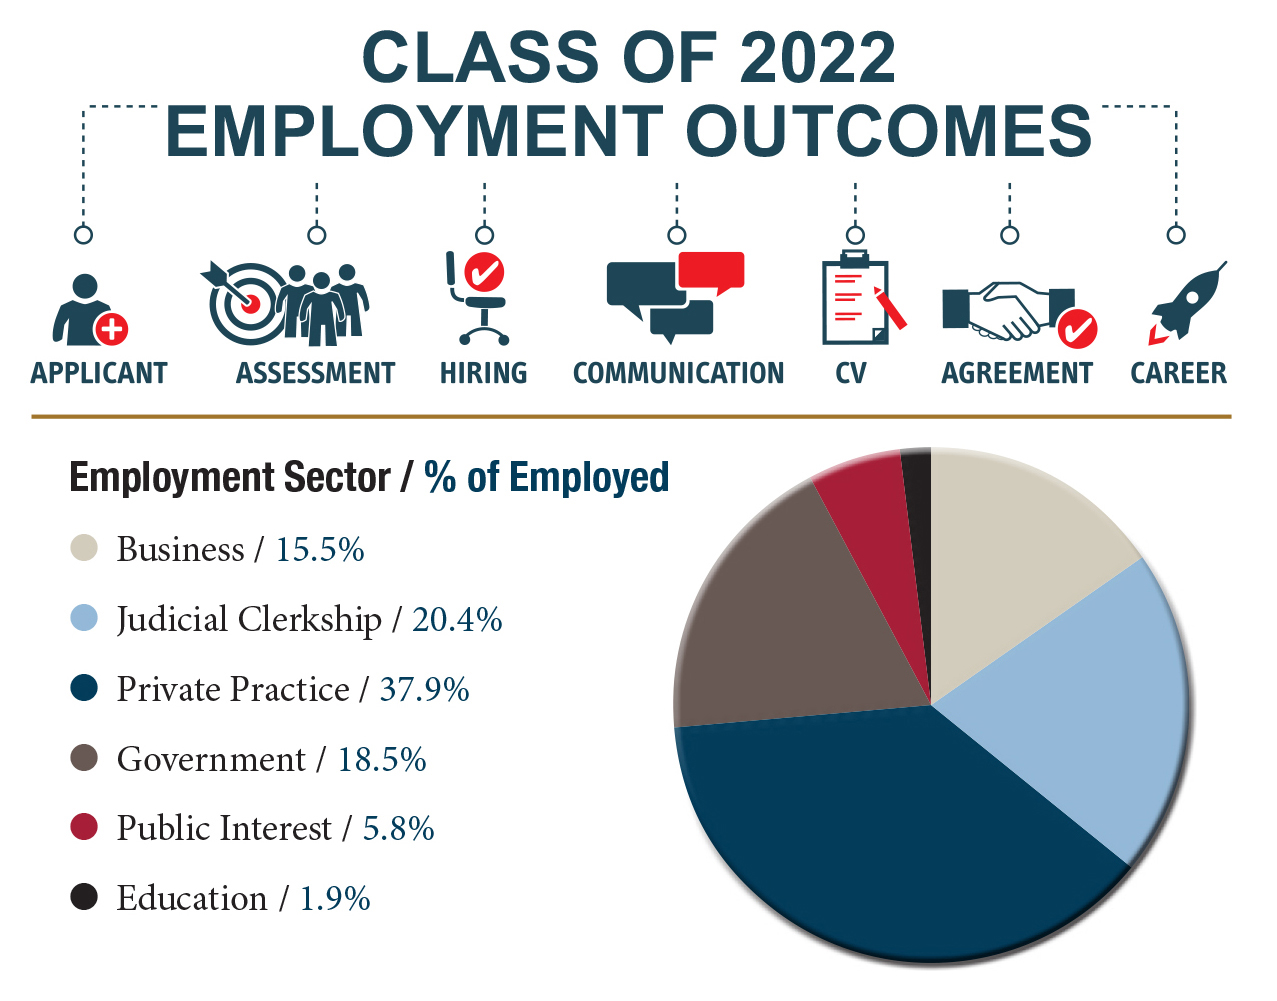 Class of 2022 Employment Outcomes by Industry breakdown